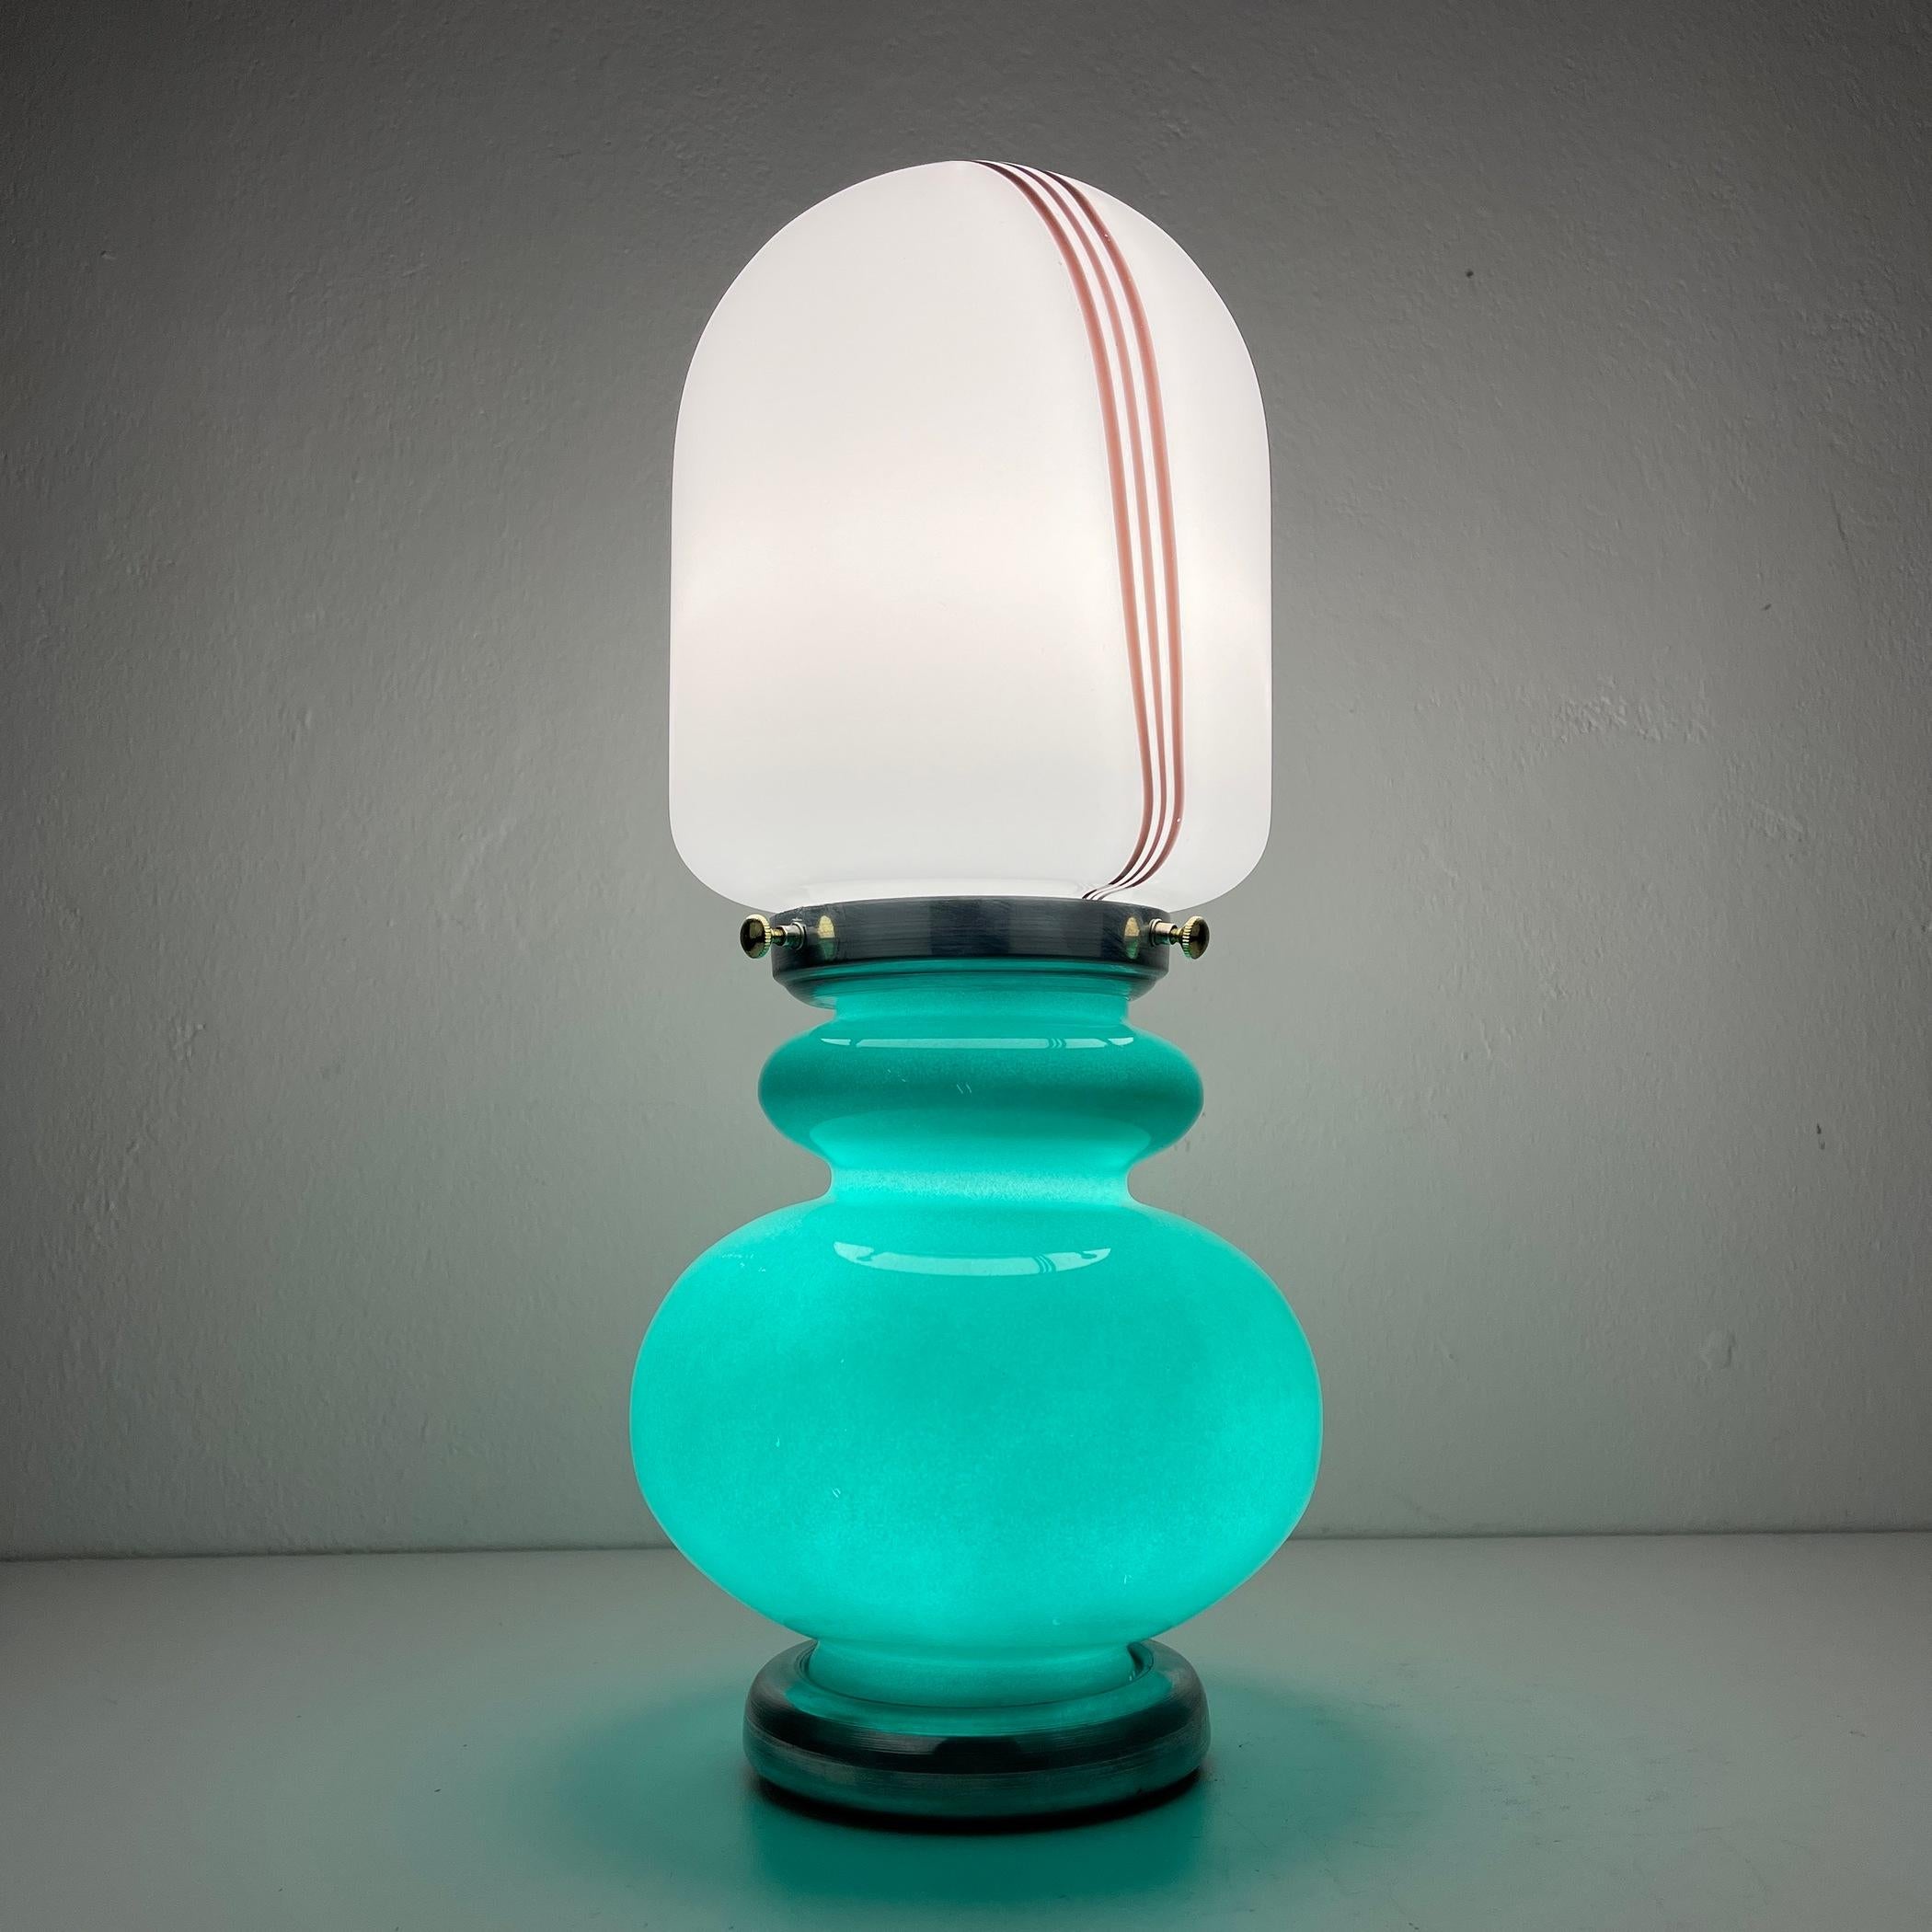 Introducing a charming table lamp, expertly crafted in Italy during the vibrant 1980s. Despite their vintage, this lamp is in impeccable condition, boasting glass that's free from any chips or cracks. This distinctive lamp consist of two glass